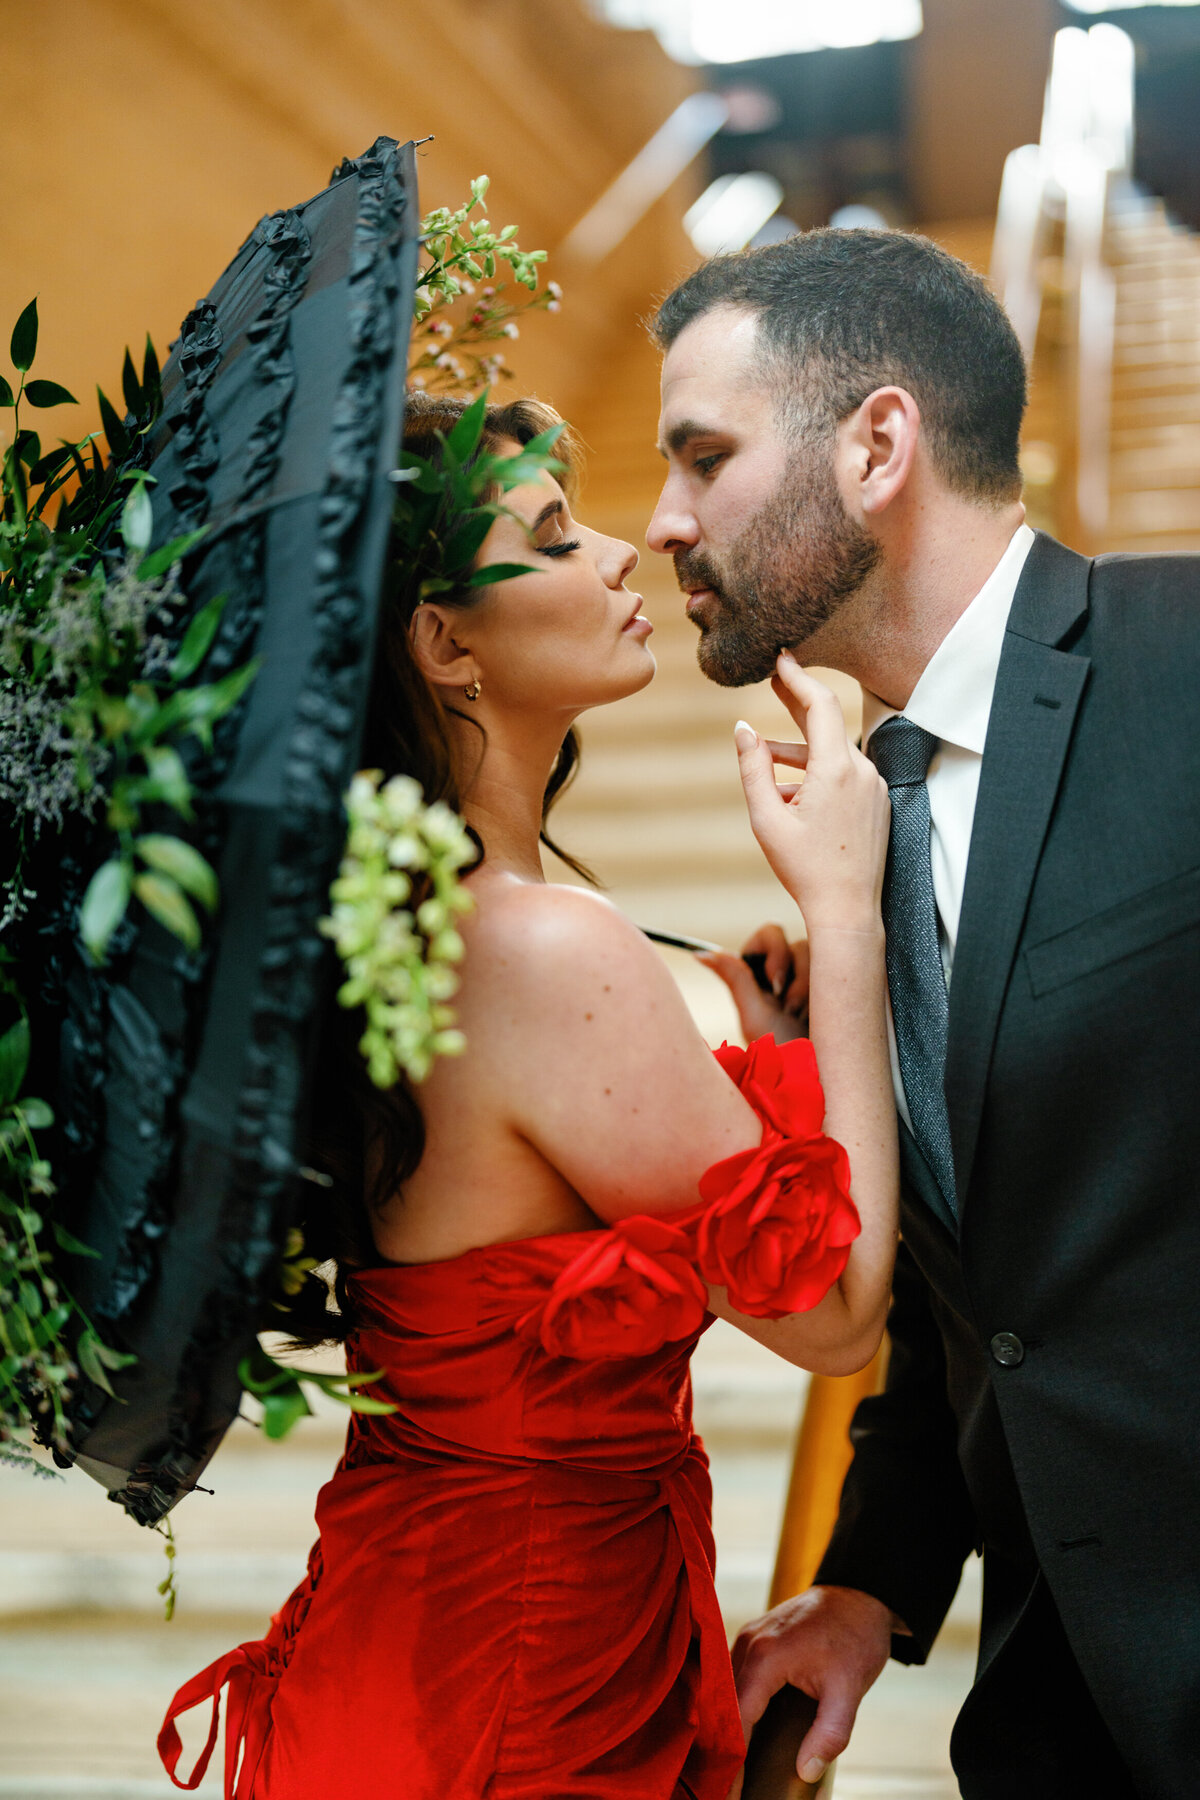 Aspen-Avenue-Chicago-Wedding-Photographer-Union-Station-Chicago-Theater-Engagement-Session-Timeless-Romantic-Red-Dress-Editorial-Stemming-From-Love-Bry-Jean-Artistry-The-Bridal-Collective-True-to-color-Luxury-FAV-35